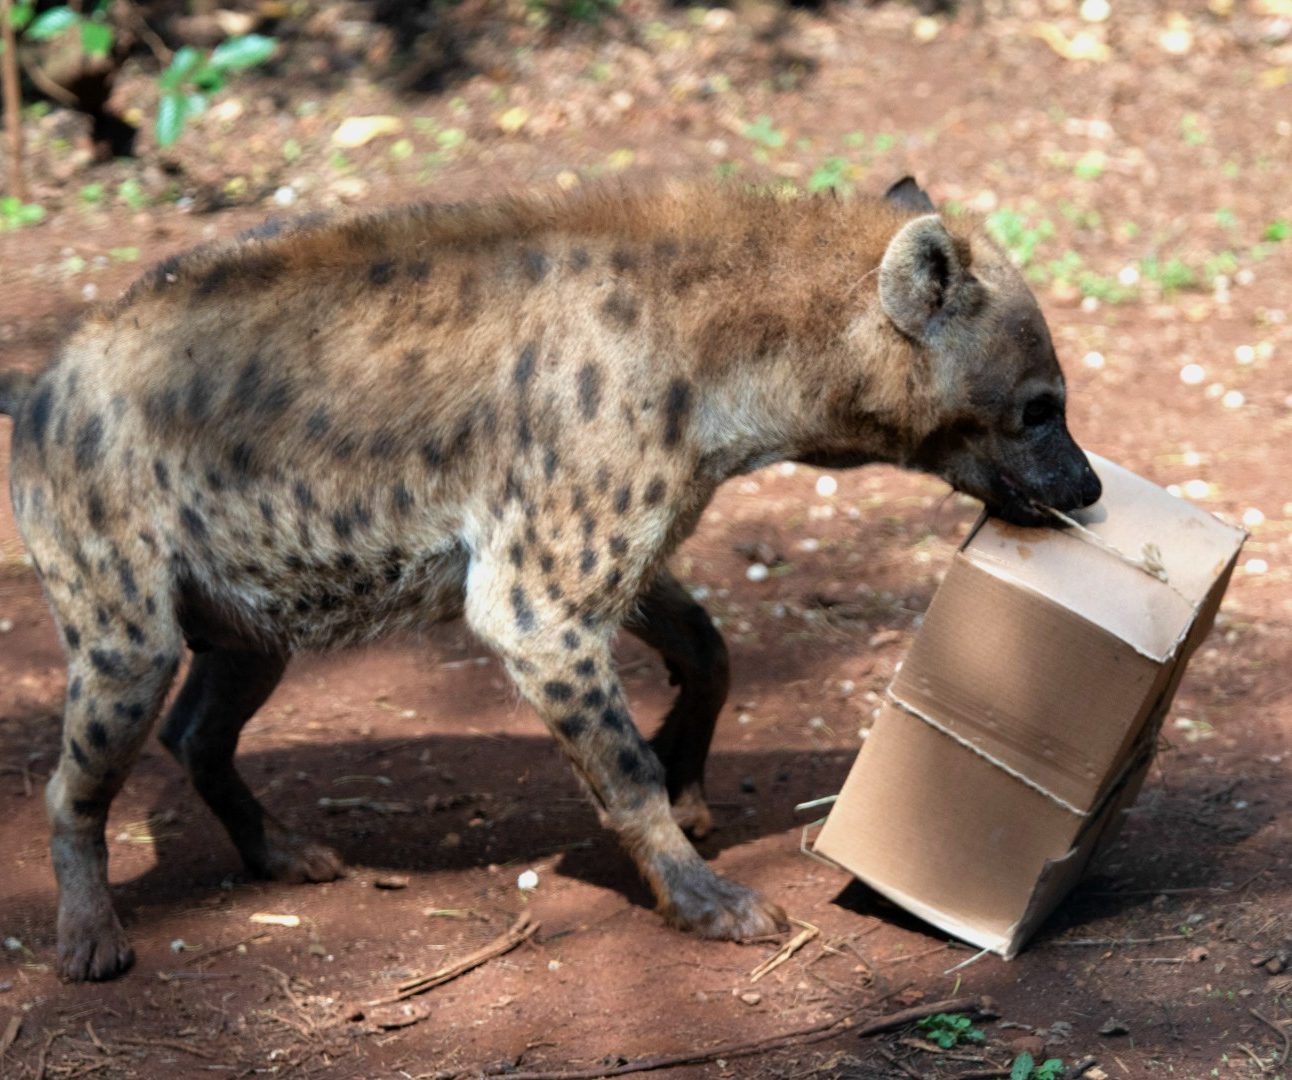 A photo of a hyena carrying a cardboard box packed with meat and vegetables, in its mouth